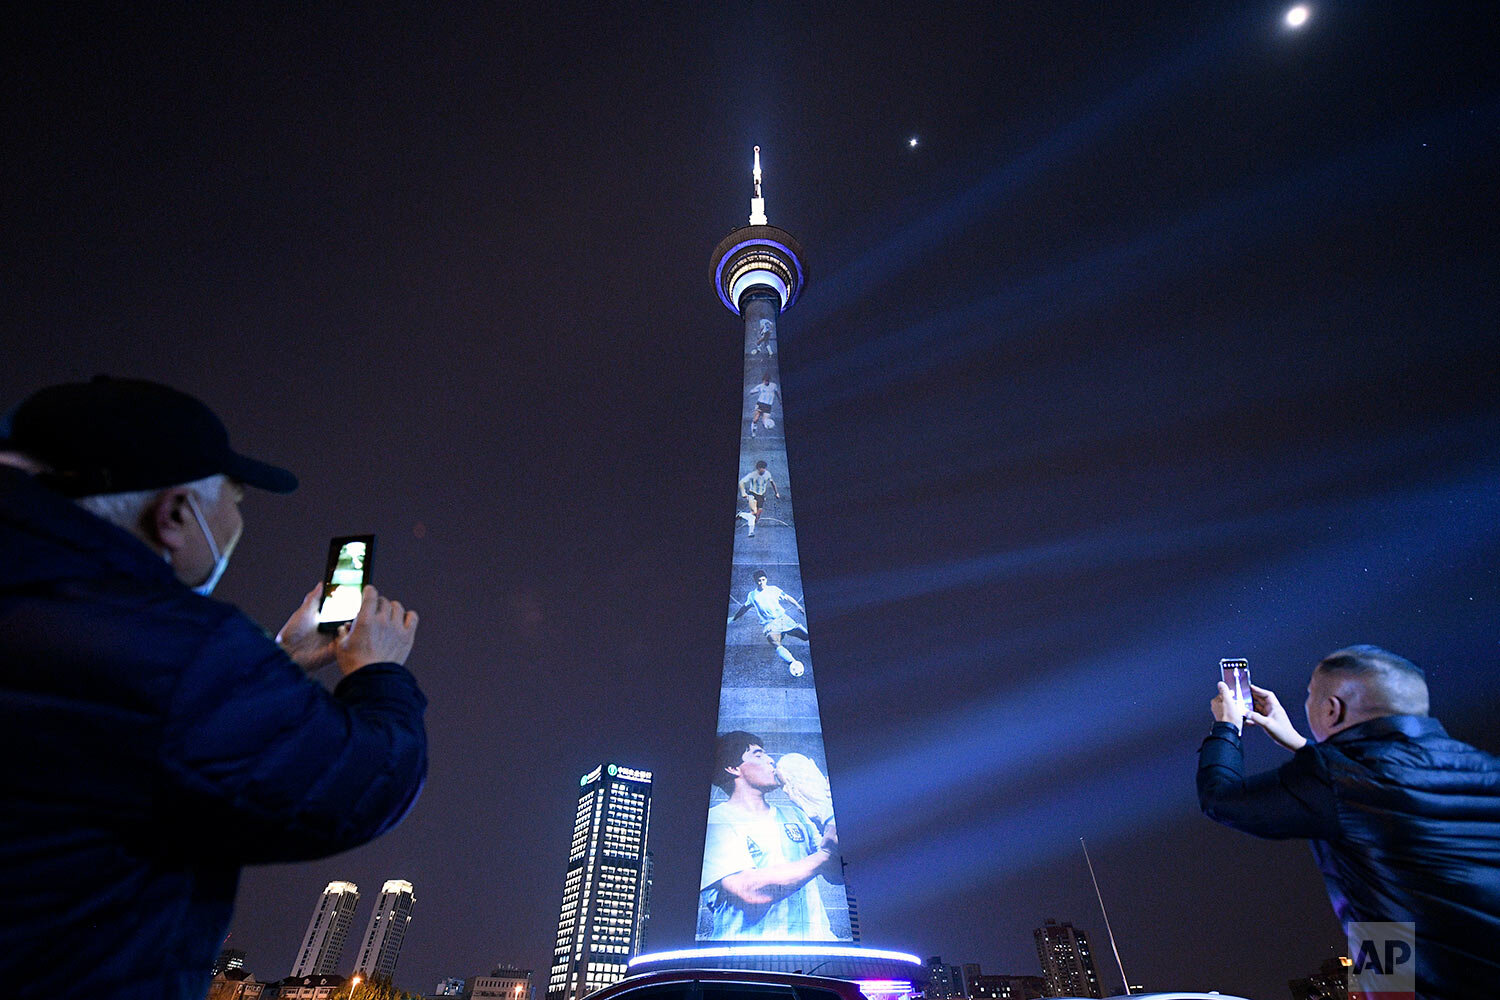  People take photos of images of soccer legend Diego Maradona projected onto a TV tower in Tianjin, China, Thursday, Nov. 26, 2020.  (Chinatopix via AP) 